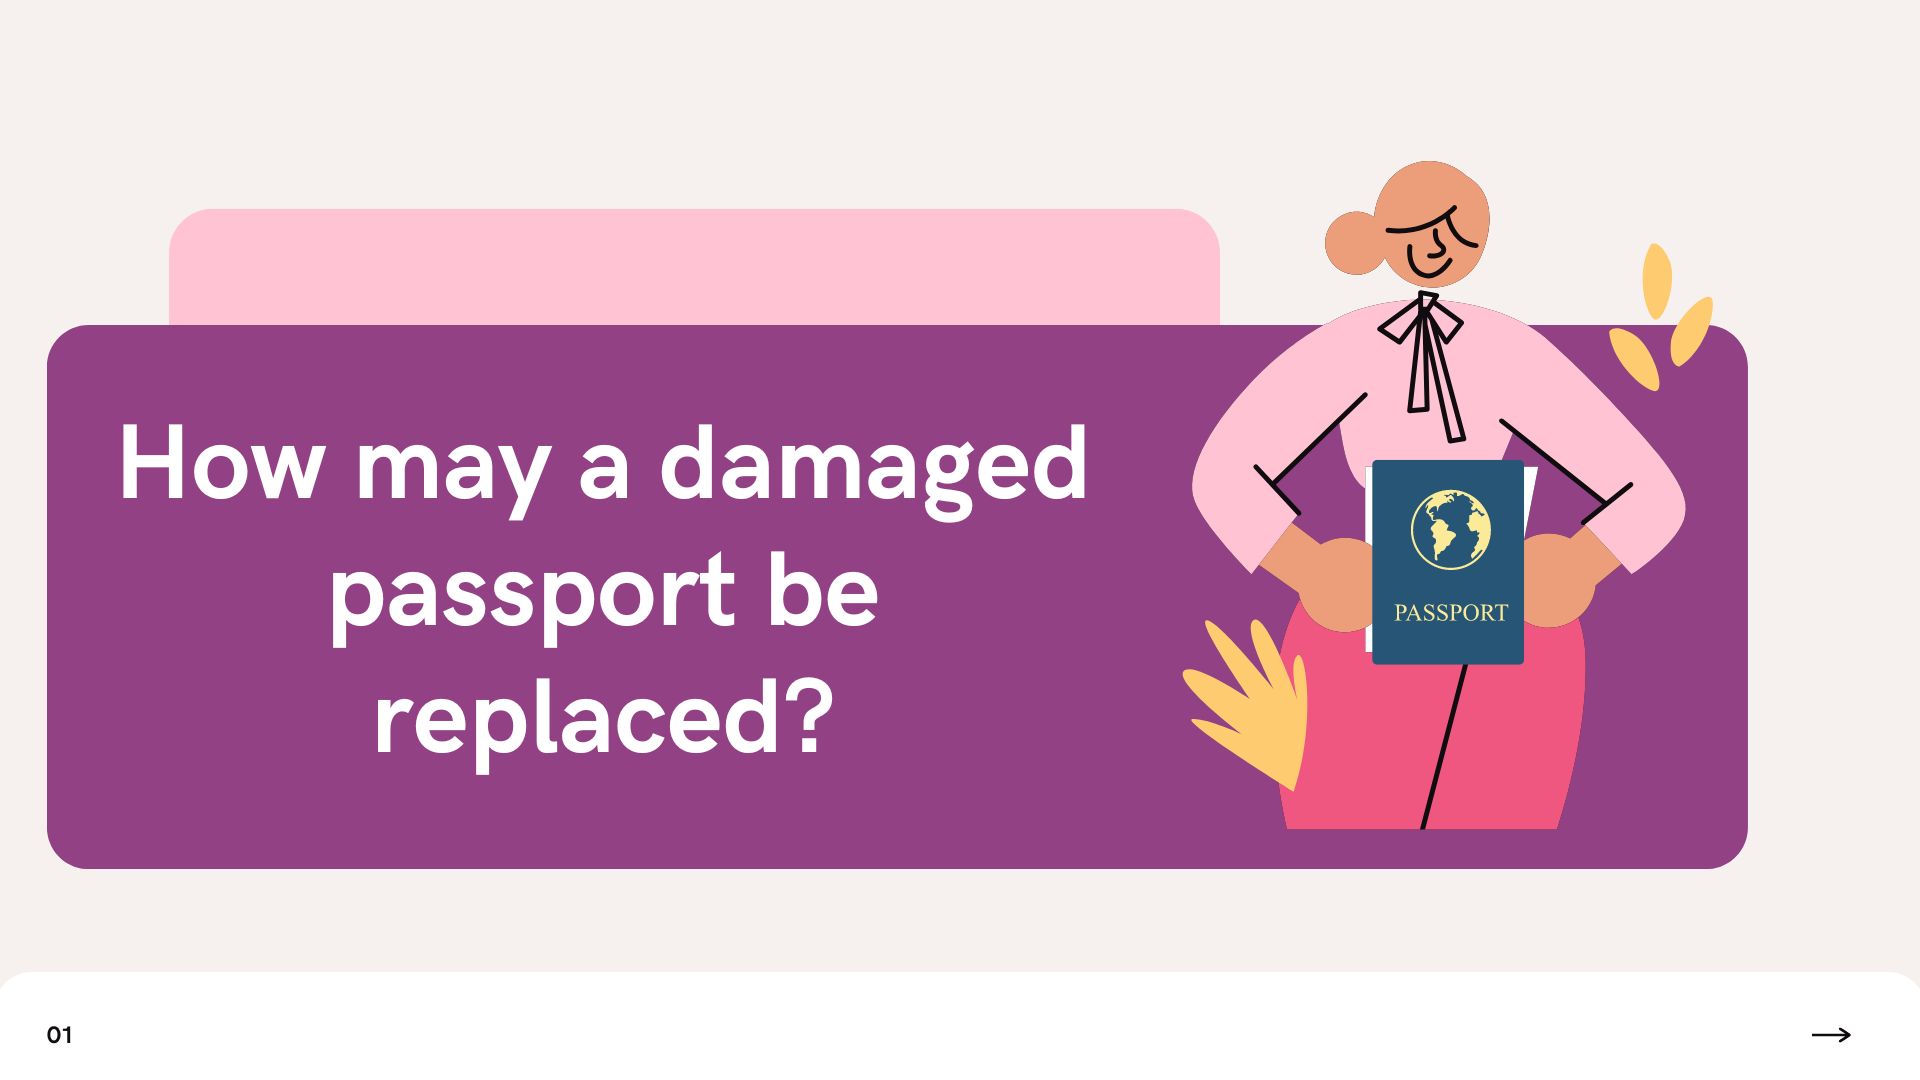 How may a damaged passport be replaced?